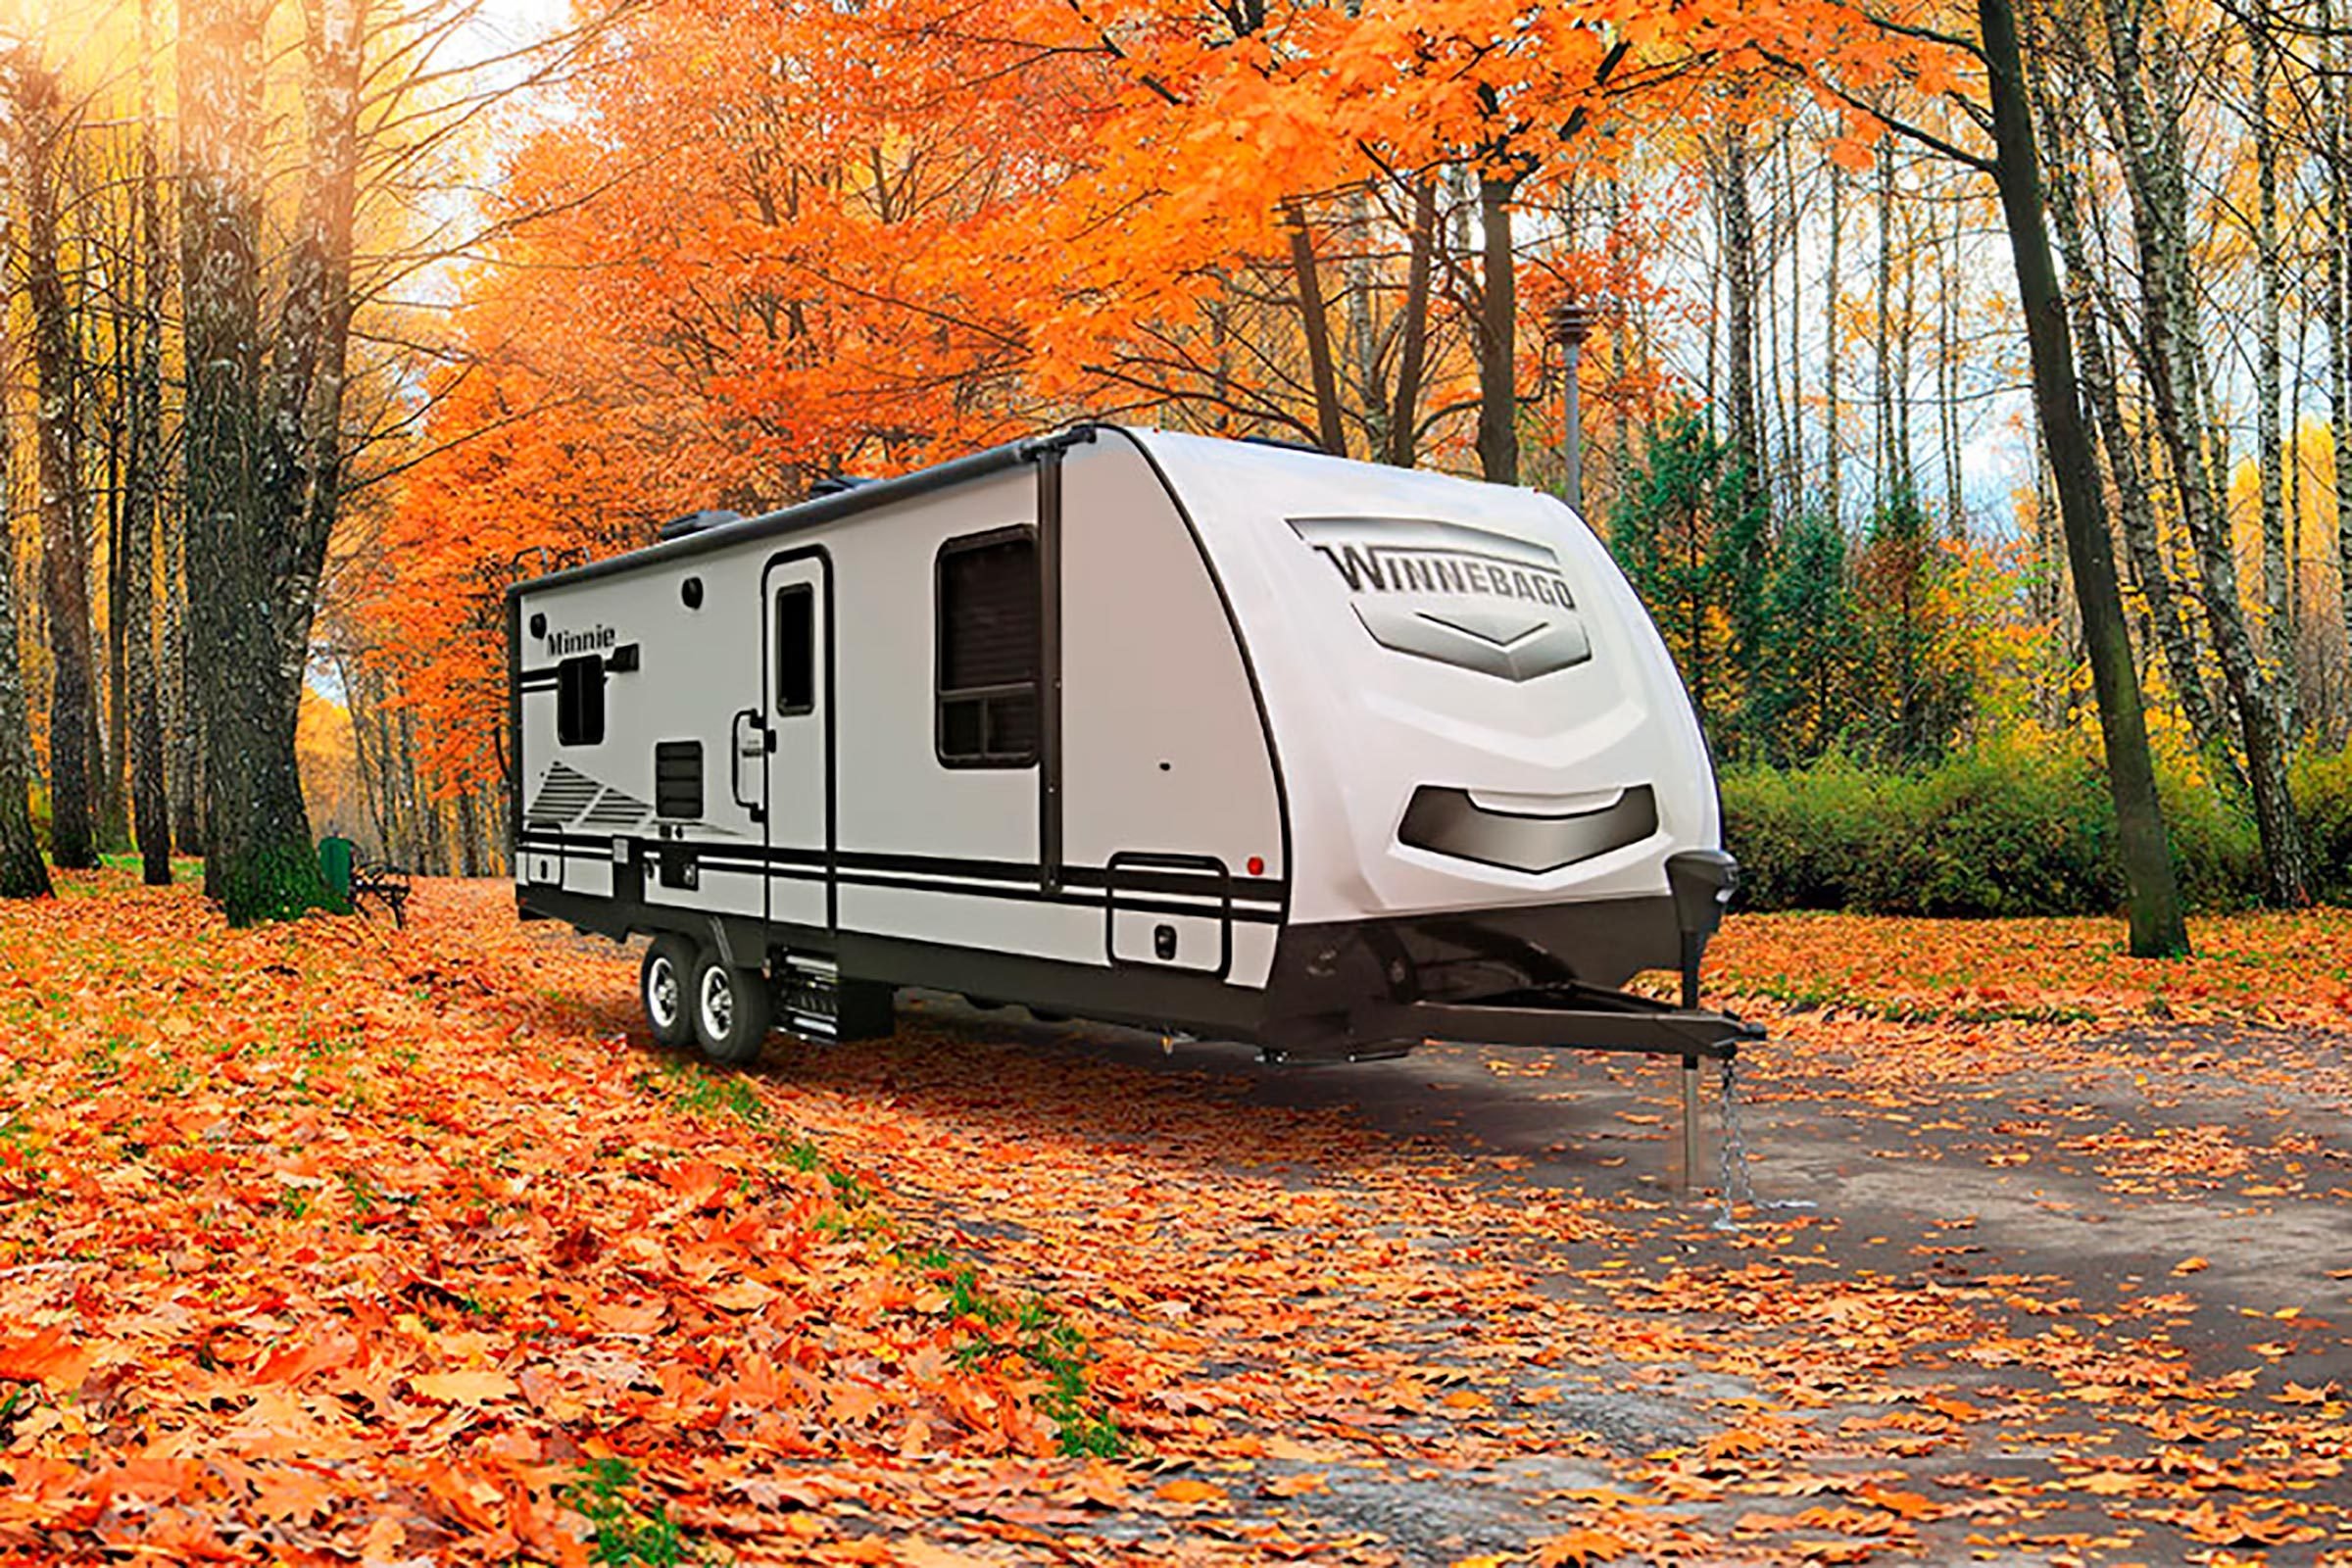 10 of the Best Travel Trailers for Road Trips Reader's Digest